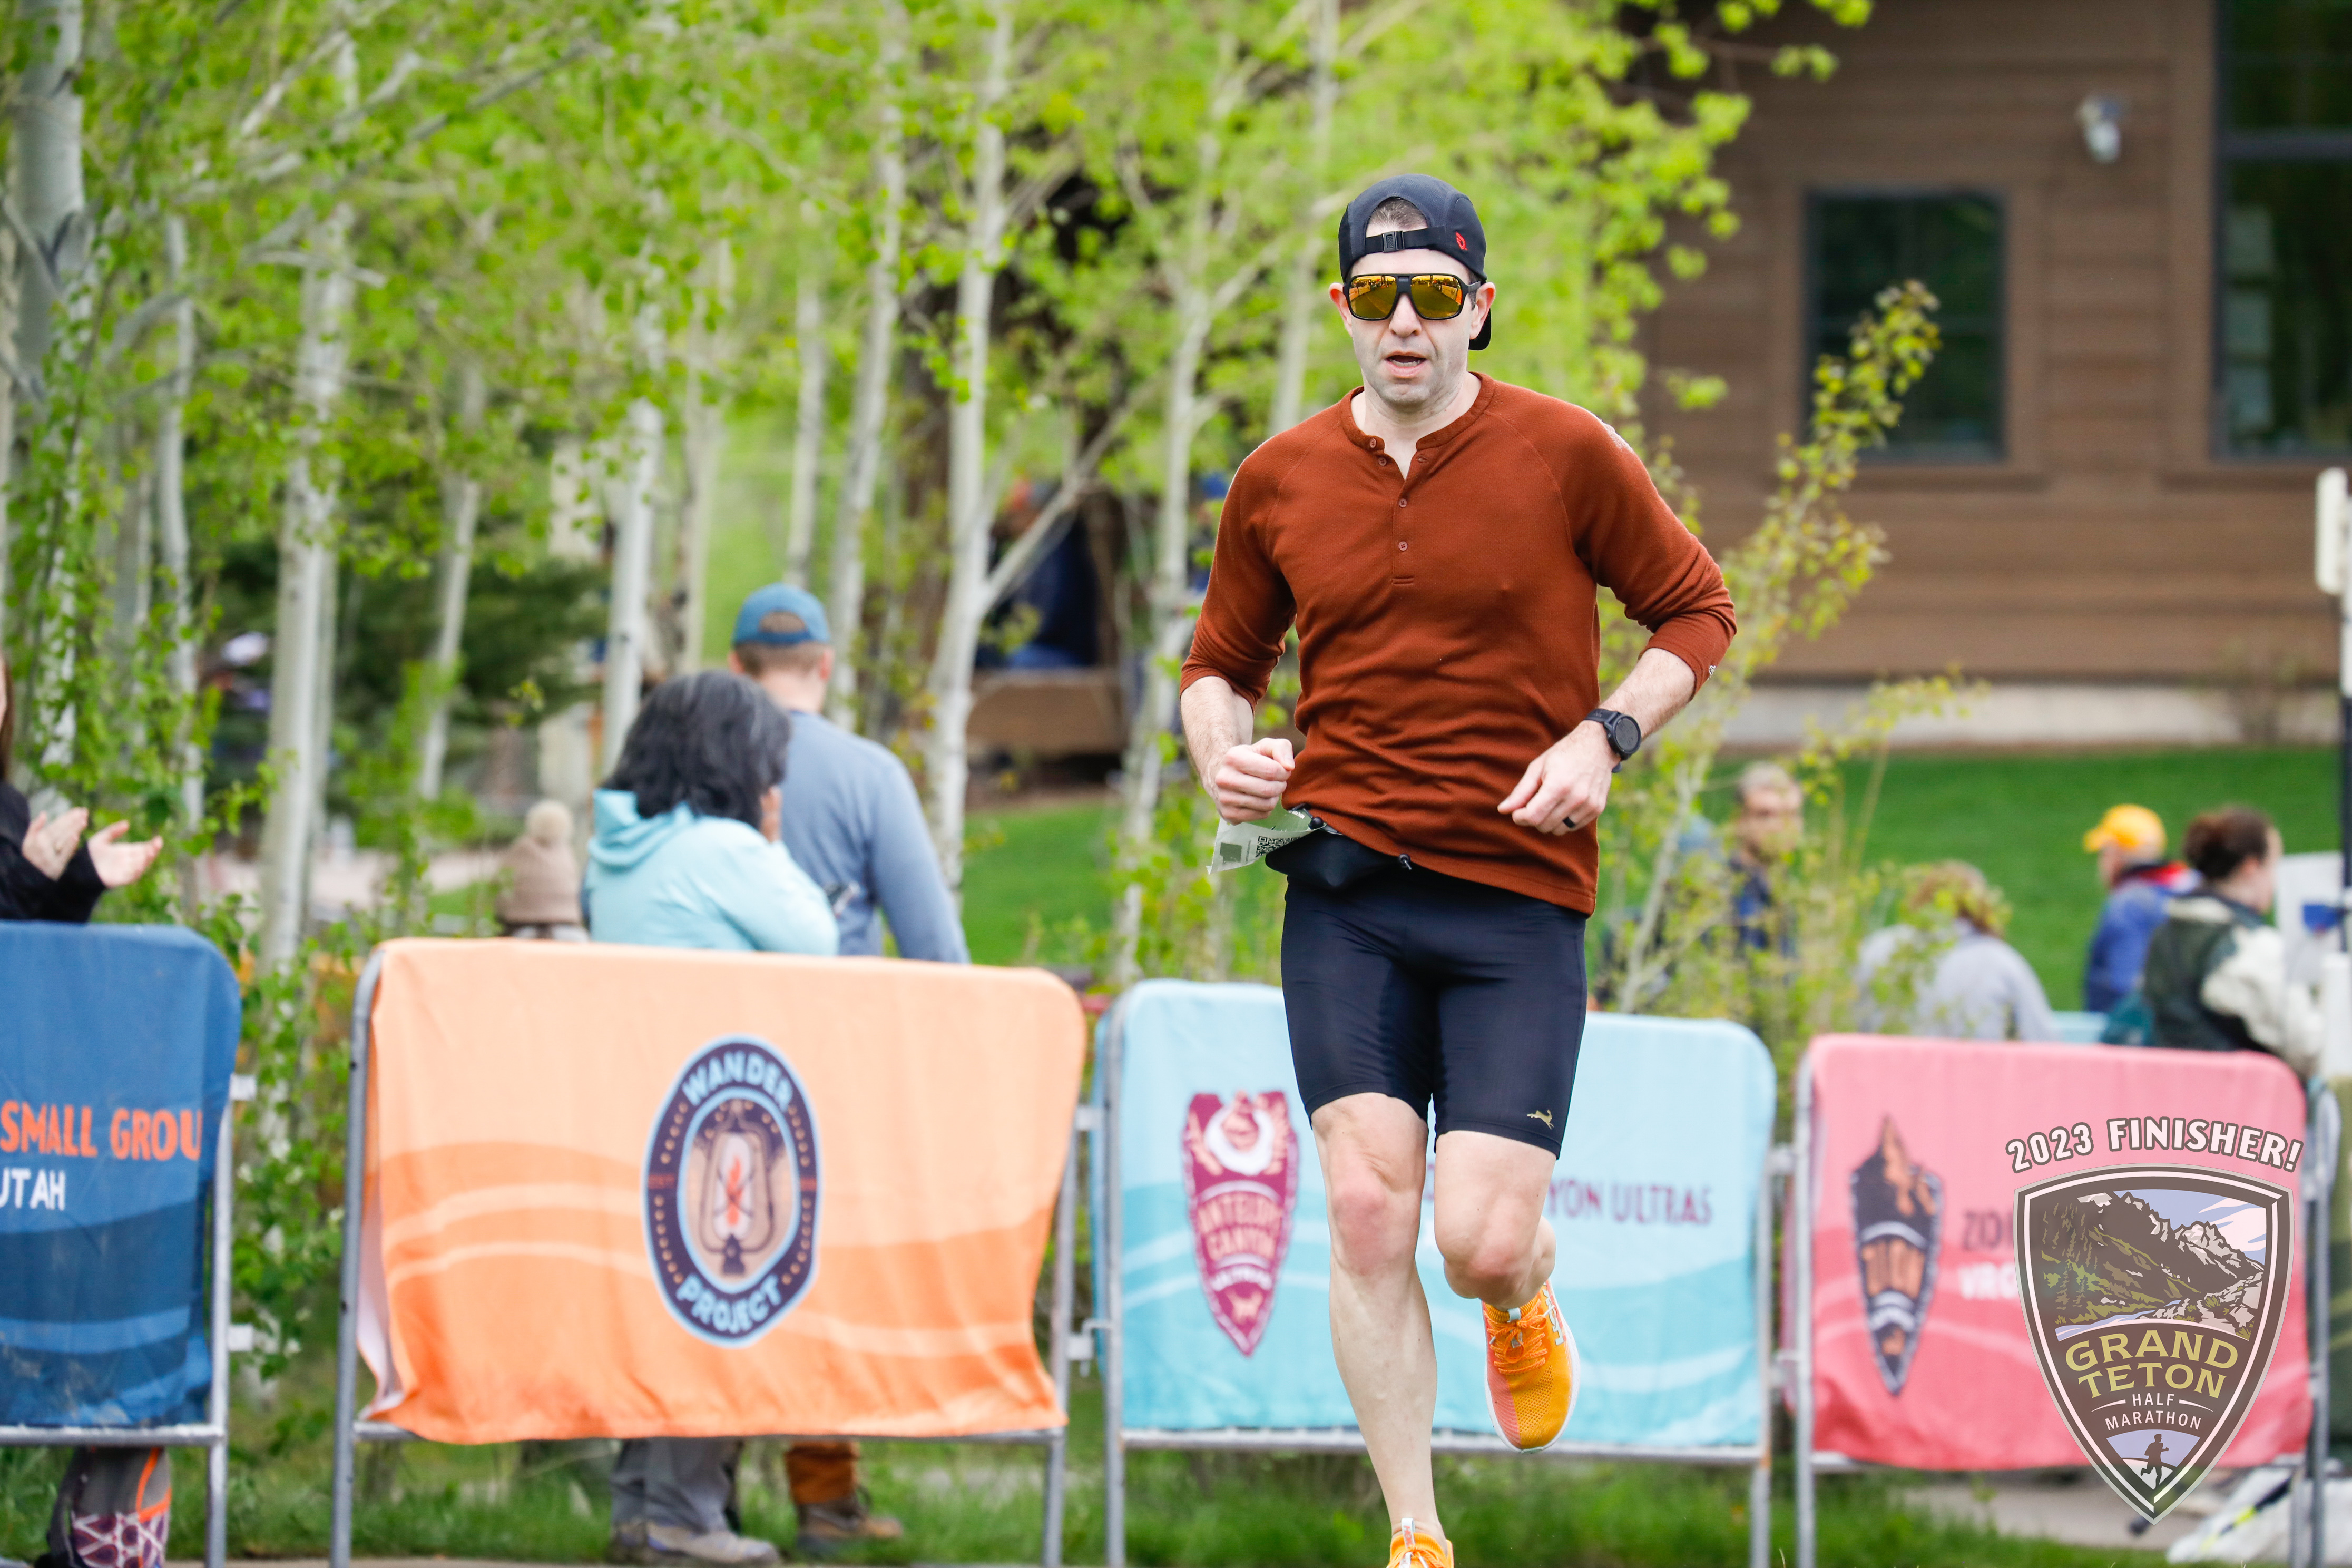 Me, mid-stride at the finish chute of the Grand Teton Half Marathon. I'm wearing a black running hat, gold sunglasses, a red henley, black tights, and orange shoes.